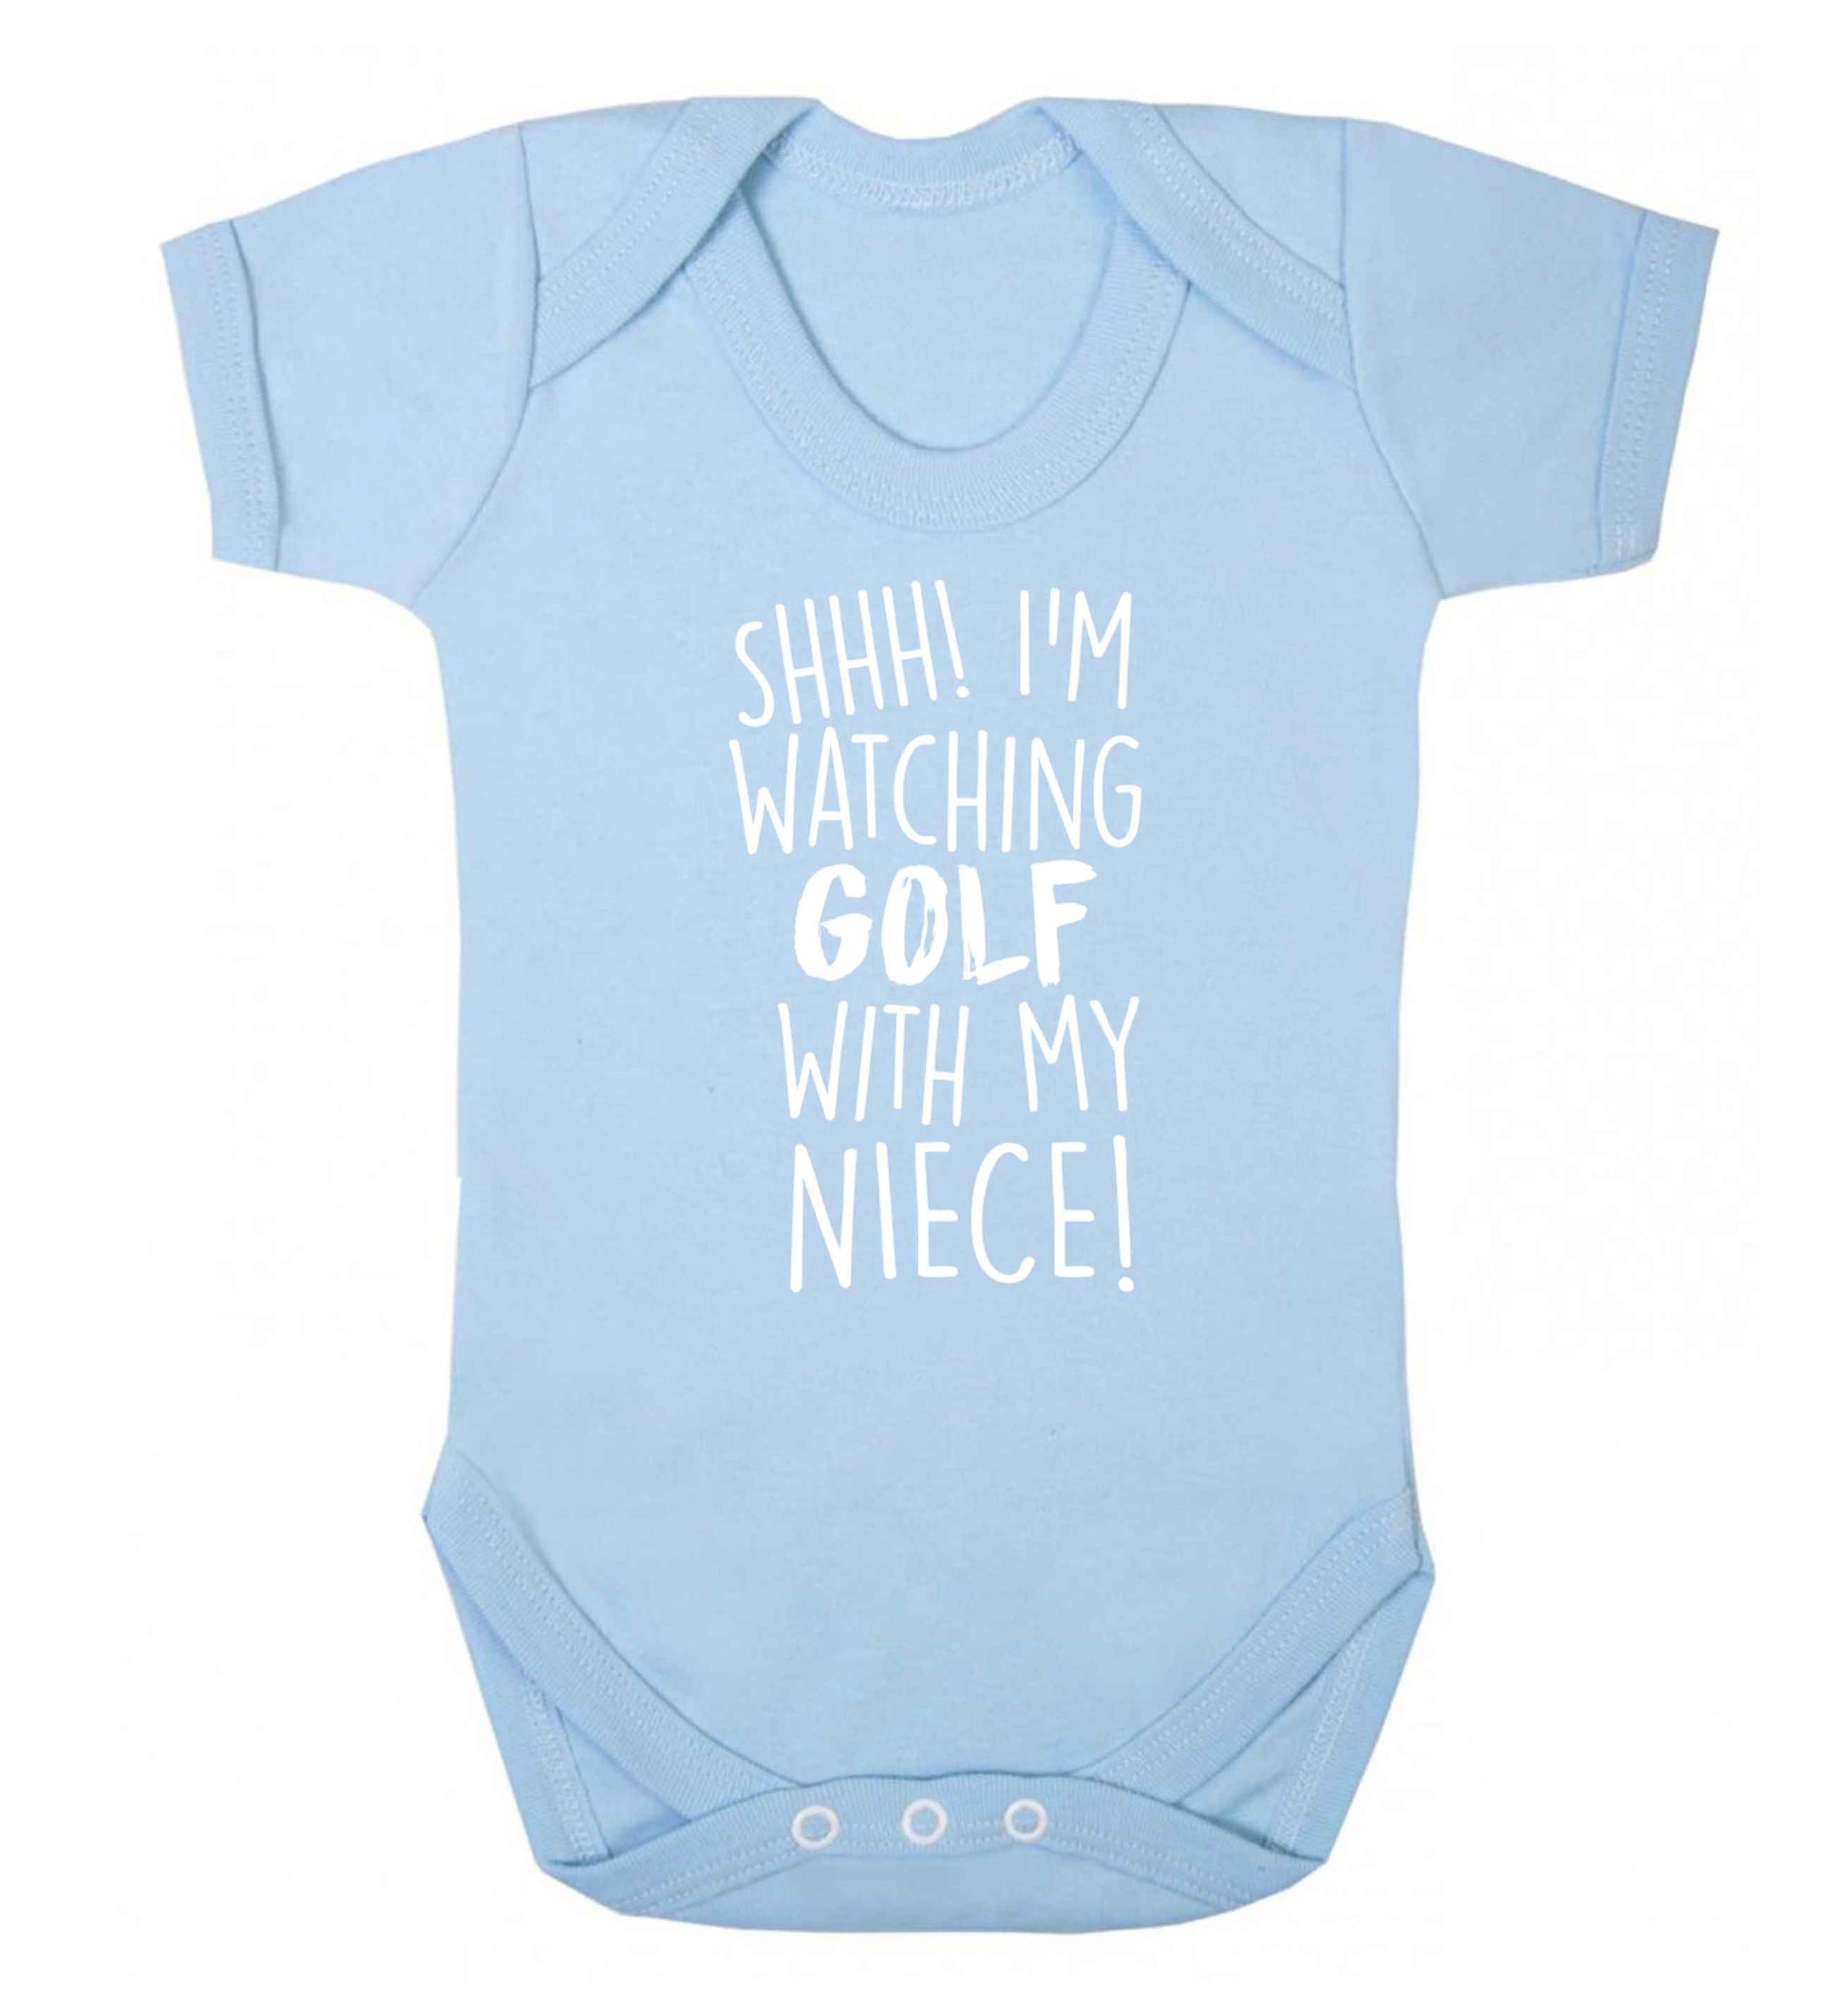 Shh I'm watching golf with my niece Baby Vest pale blue 18-24 months